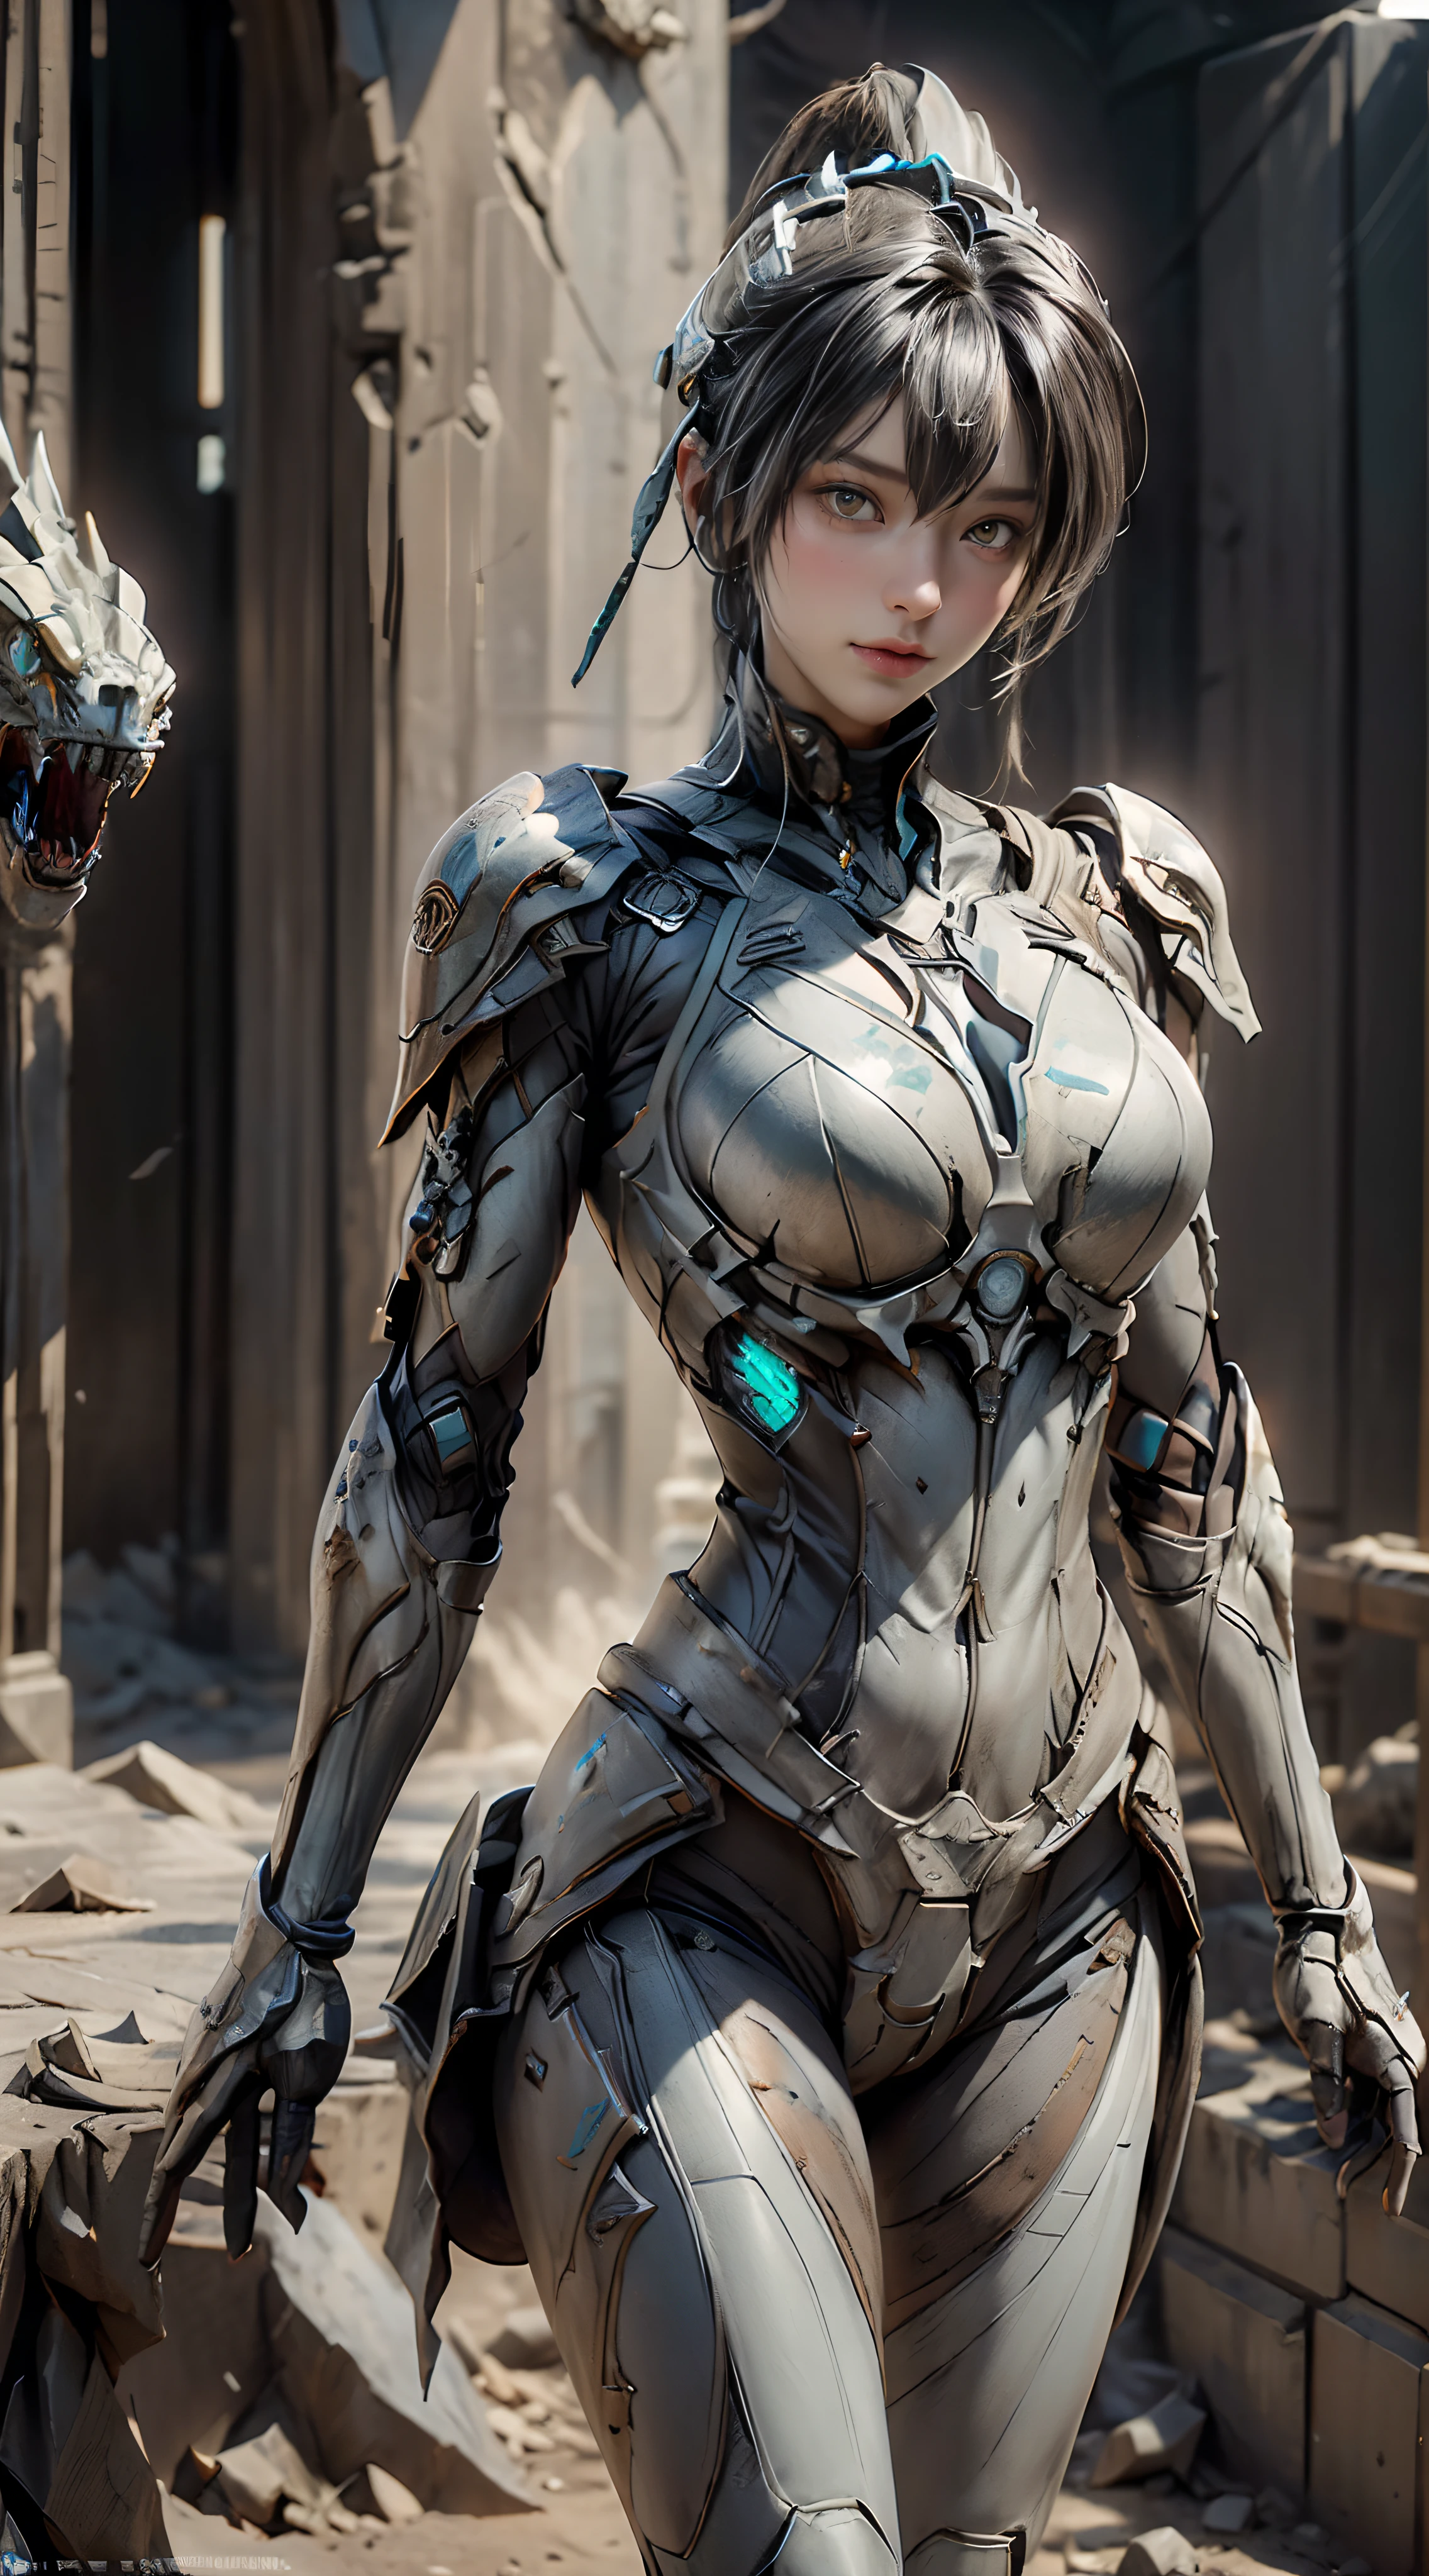 ((top-quality)), ((​masterpiece)), (detaileds:1.4), 。.。.。.。.。.。.3D, Beautiful Cyberpunk Woman Image,nffsw(HighDynamicRange),Ray traching,NVIDIA RTX,Hyper-Resolution,Unreal 5,Sub-surface scattering,PBR Texturing,Postprocess,Anisotropy Filtering,depth of fields,Maximum clarity and sharpness,multi-layer texture,Albedo and specular maps,Surface Shading,Accurate simulation of light-material interactions,perfectly proportions,Octane Rendering,Two-tone lighting,Wide aperture,Low ISO、White Balance、thirds rule、8K Raw、(((Armor with a black dragon design))),(((Clothes are tattered))),(((Clothes are stained with dirt or dust)))